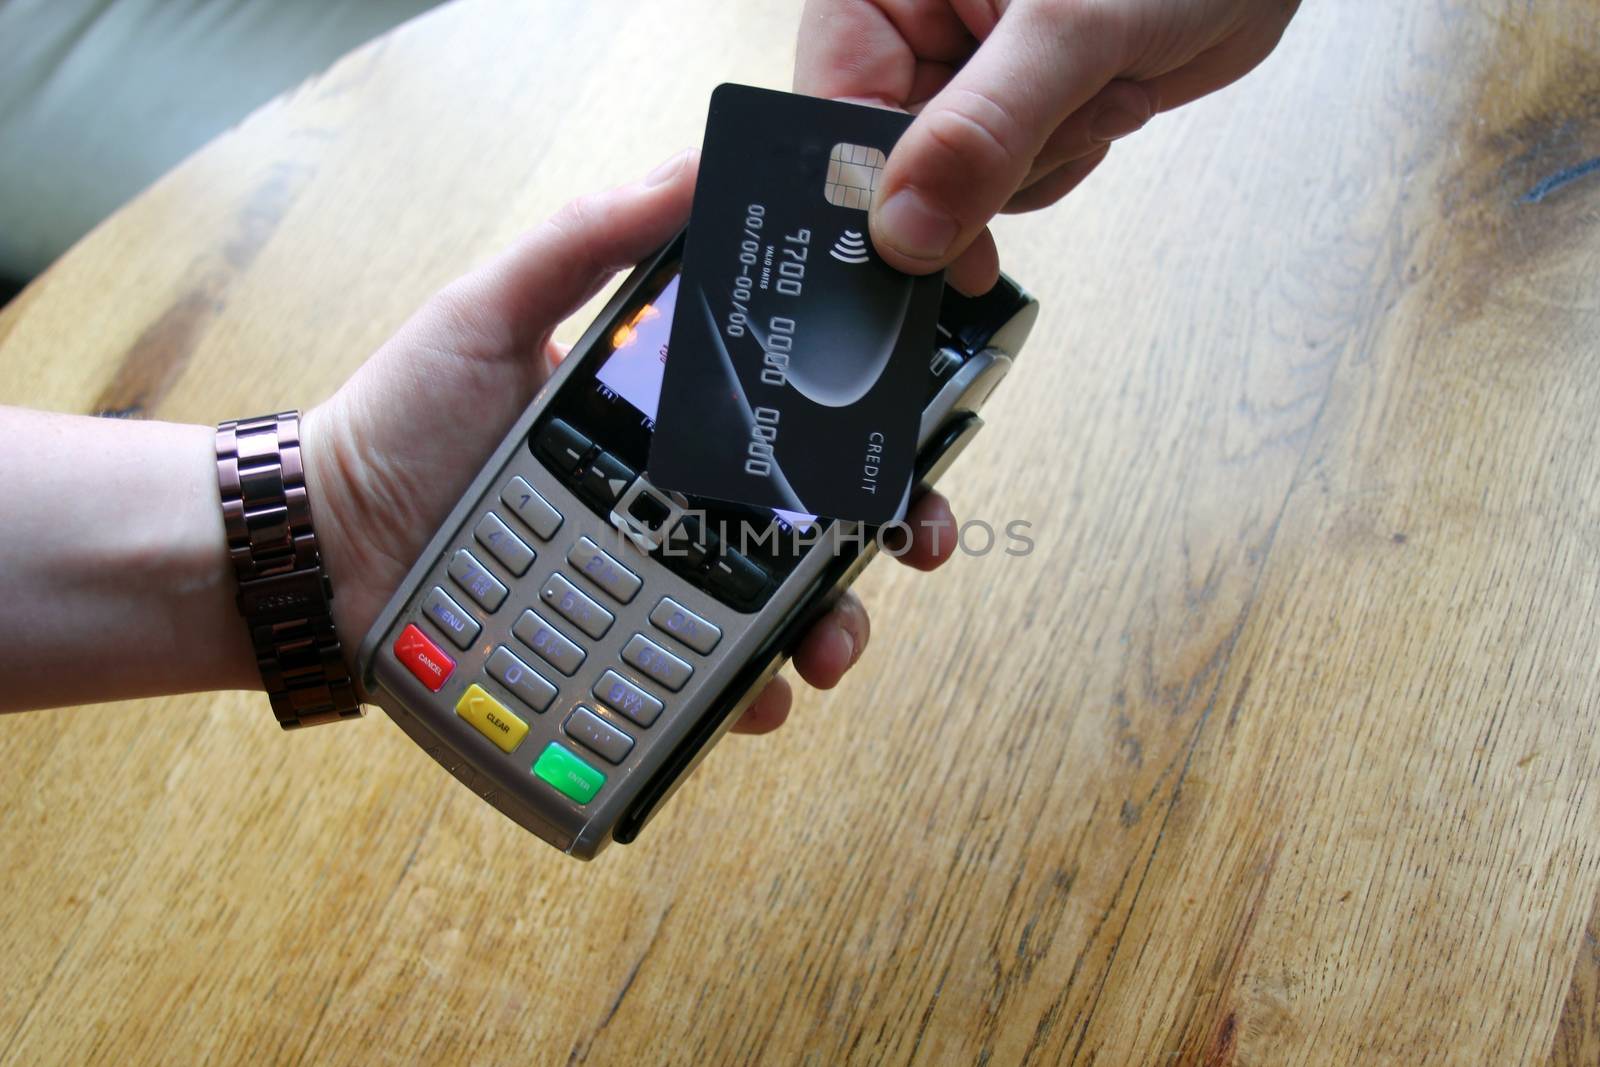 contactless payment card pdq background copy space with hand hol by cheekylorns